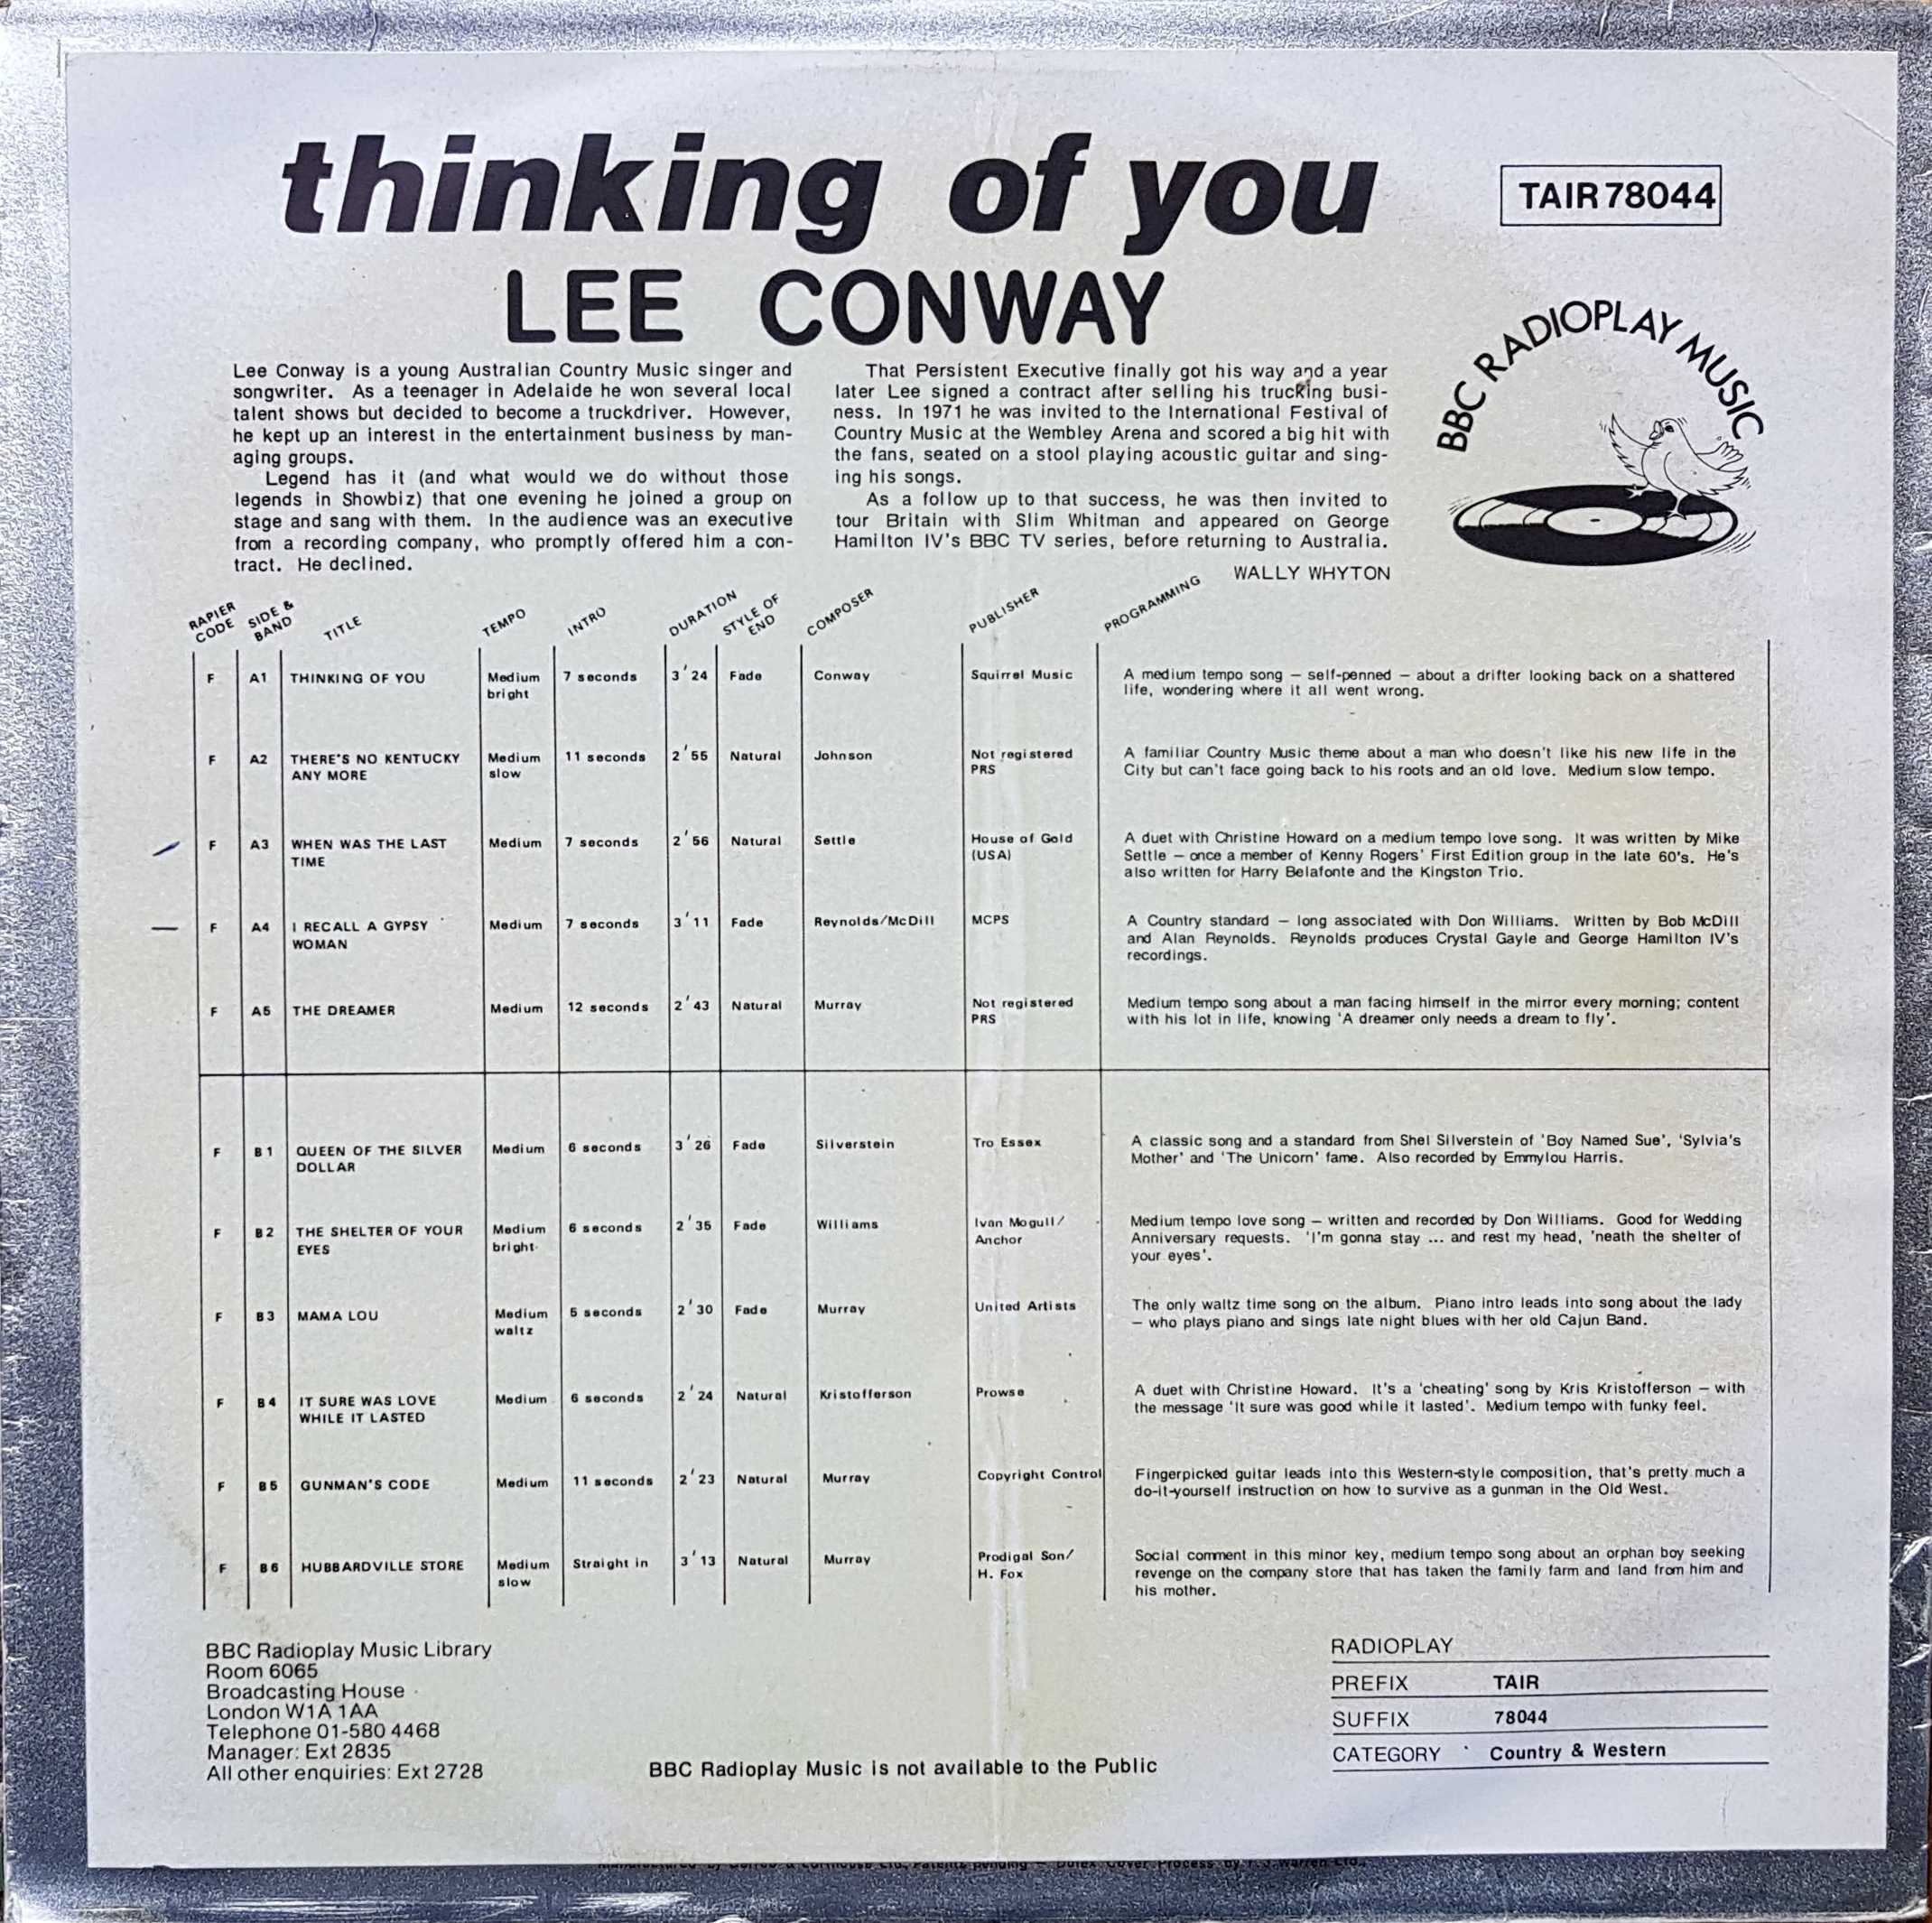 Picture of TAIR 78044 Lee Conway - thinking of you by artist Lee Conway from the BBC records and Tapes library